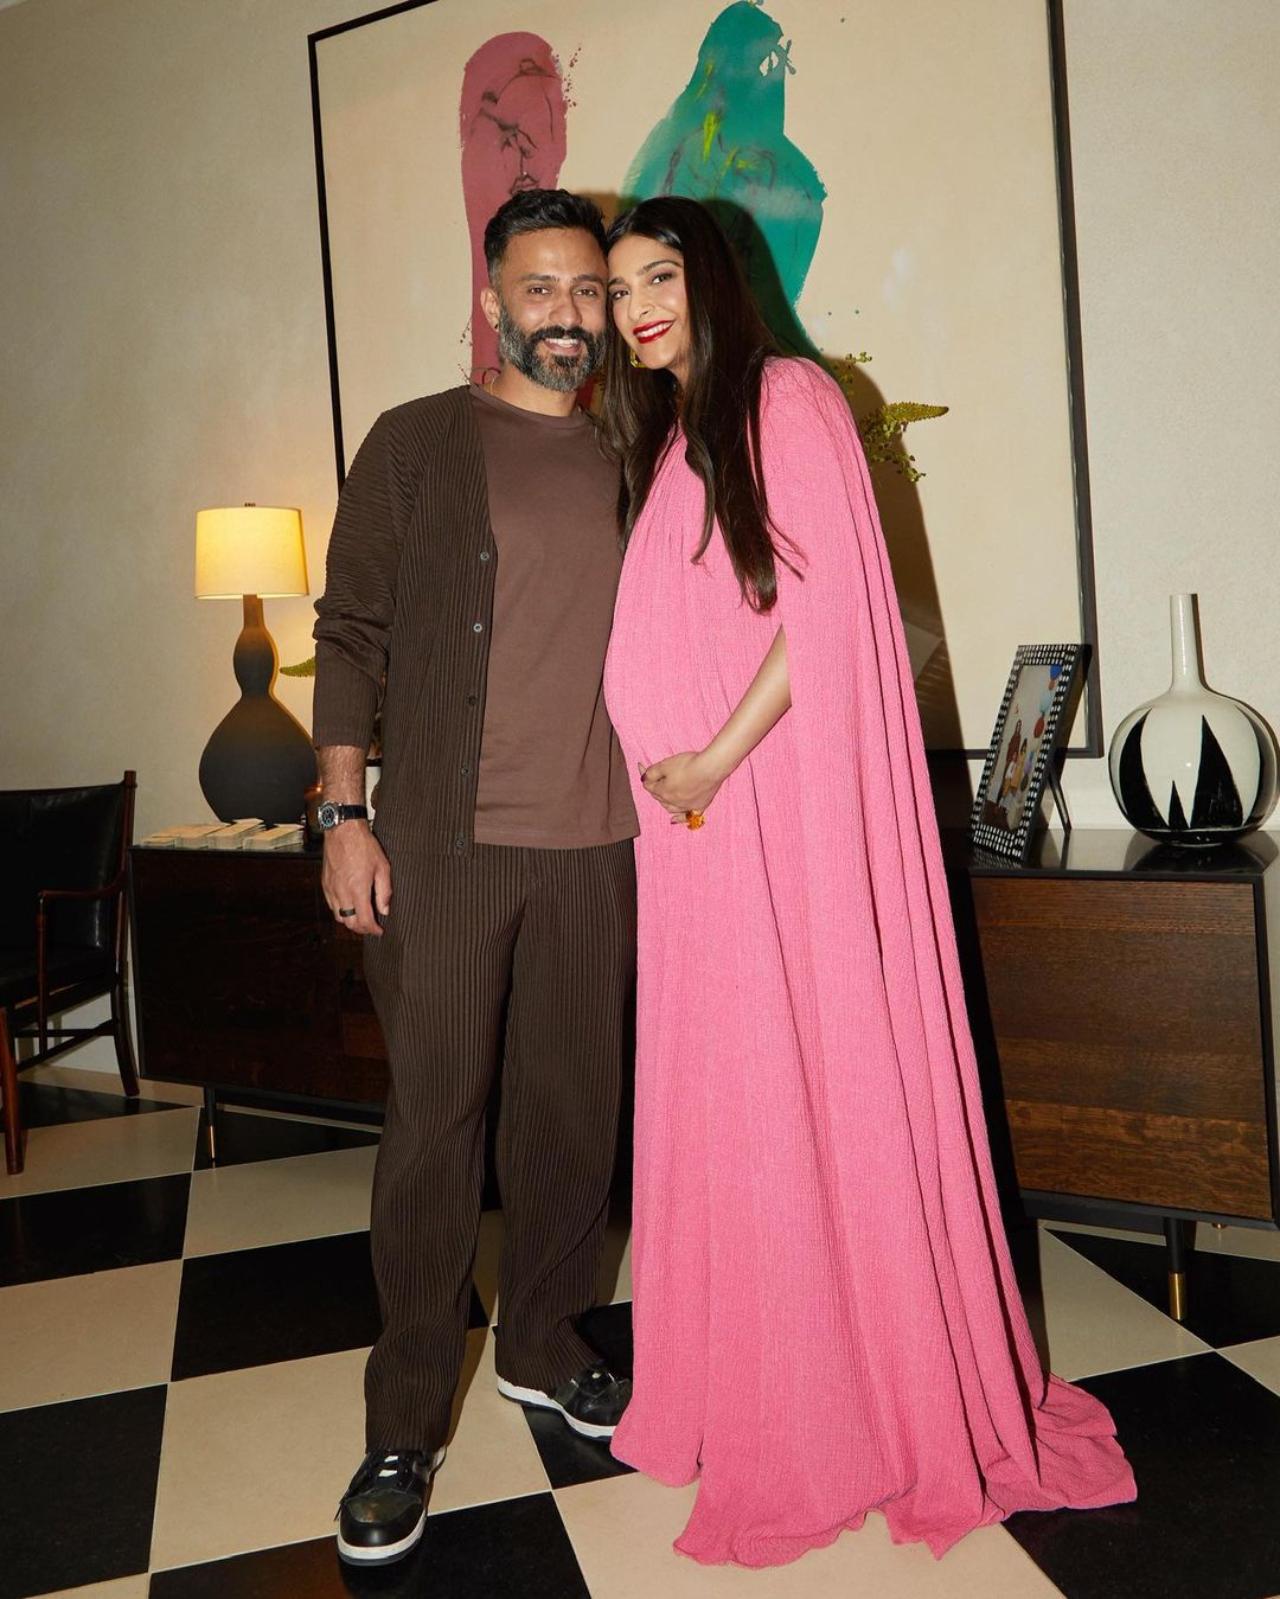 Sonam and Anand had announced that they are expecting their first child together earlier this year. The couple tied the knot in May 2018 after dating for a long time. In an interview, Sonam said that now acting will take a back seat for her and she will be spending her time on her newborn and embracing the role of a mother